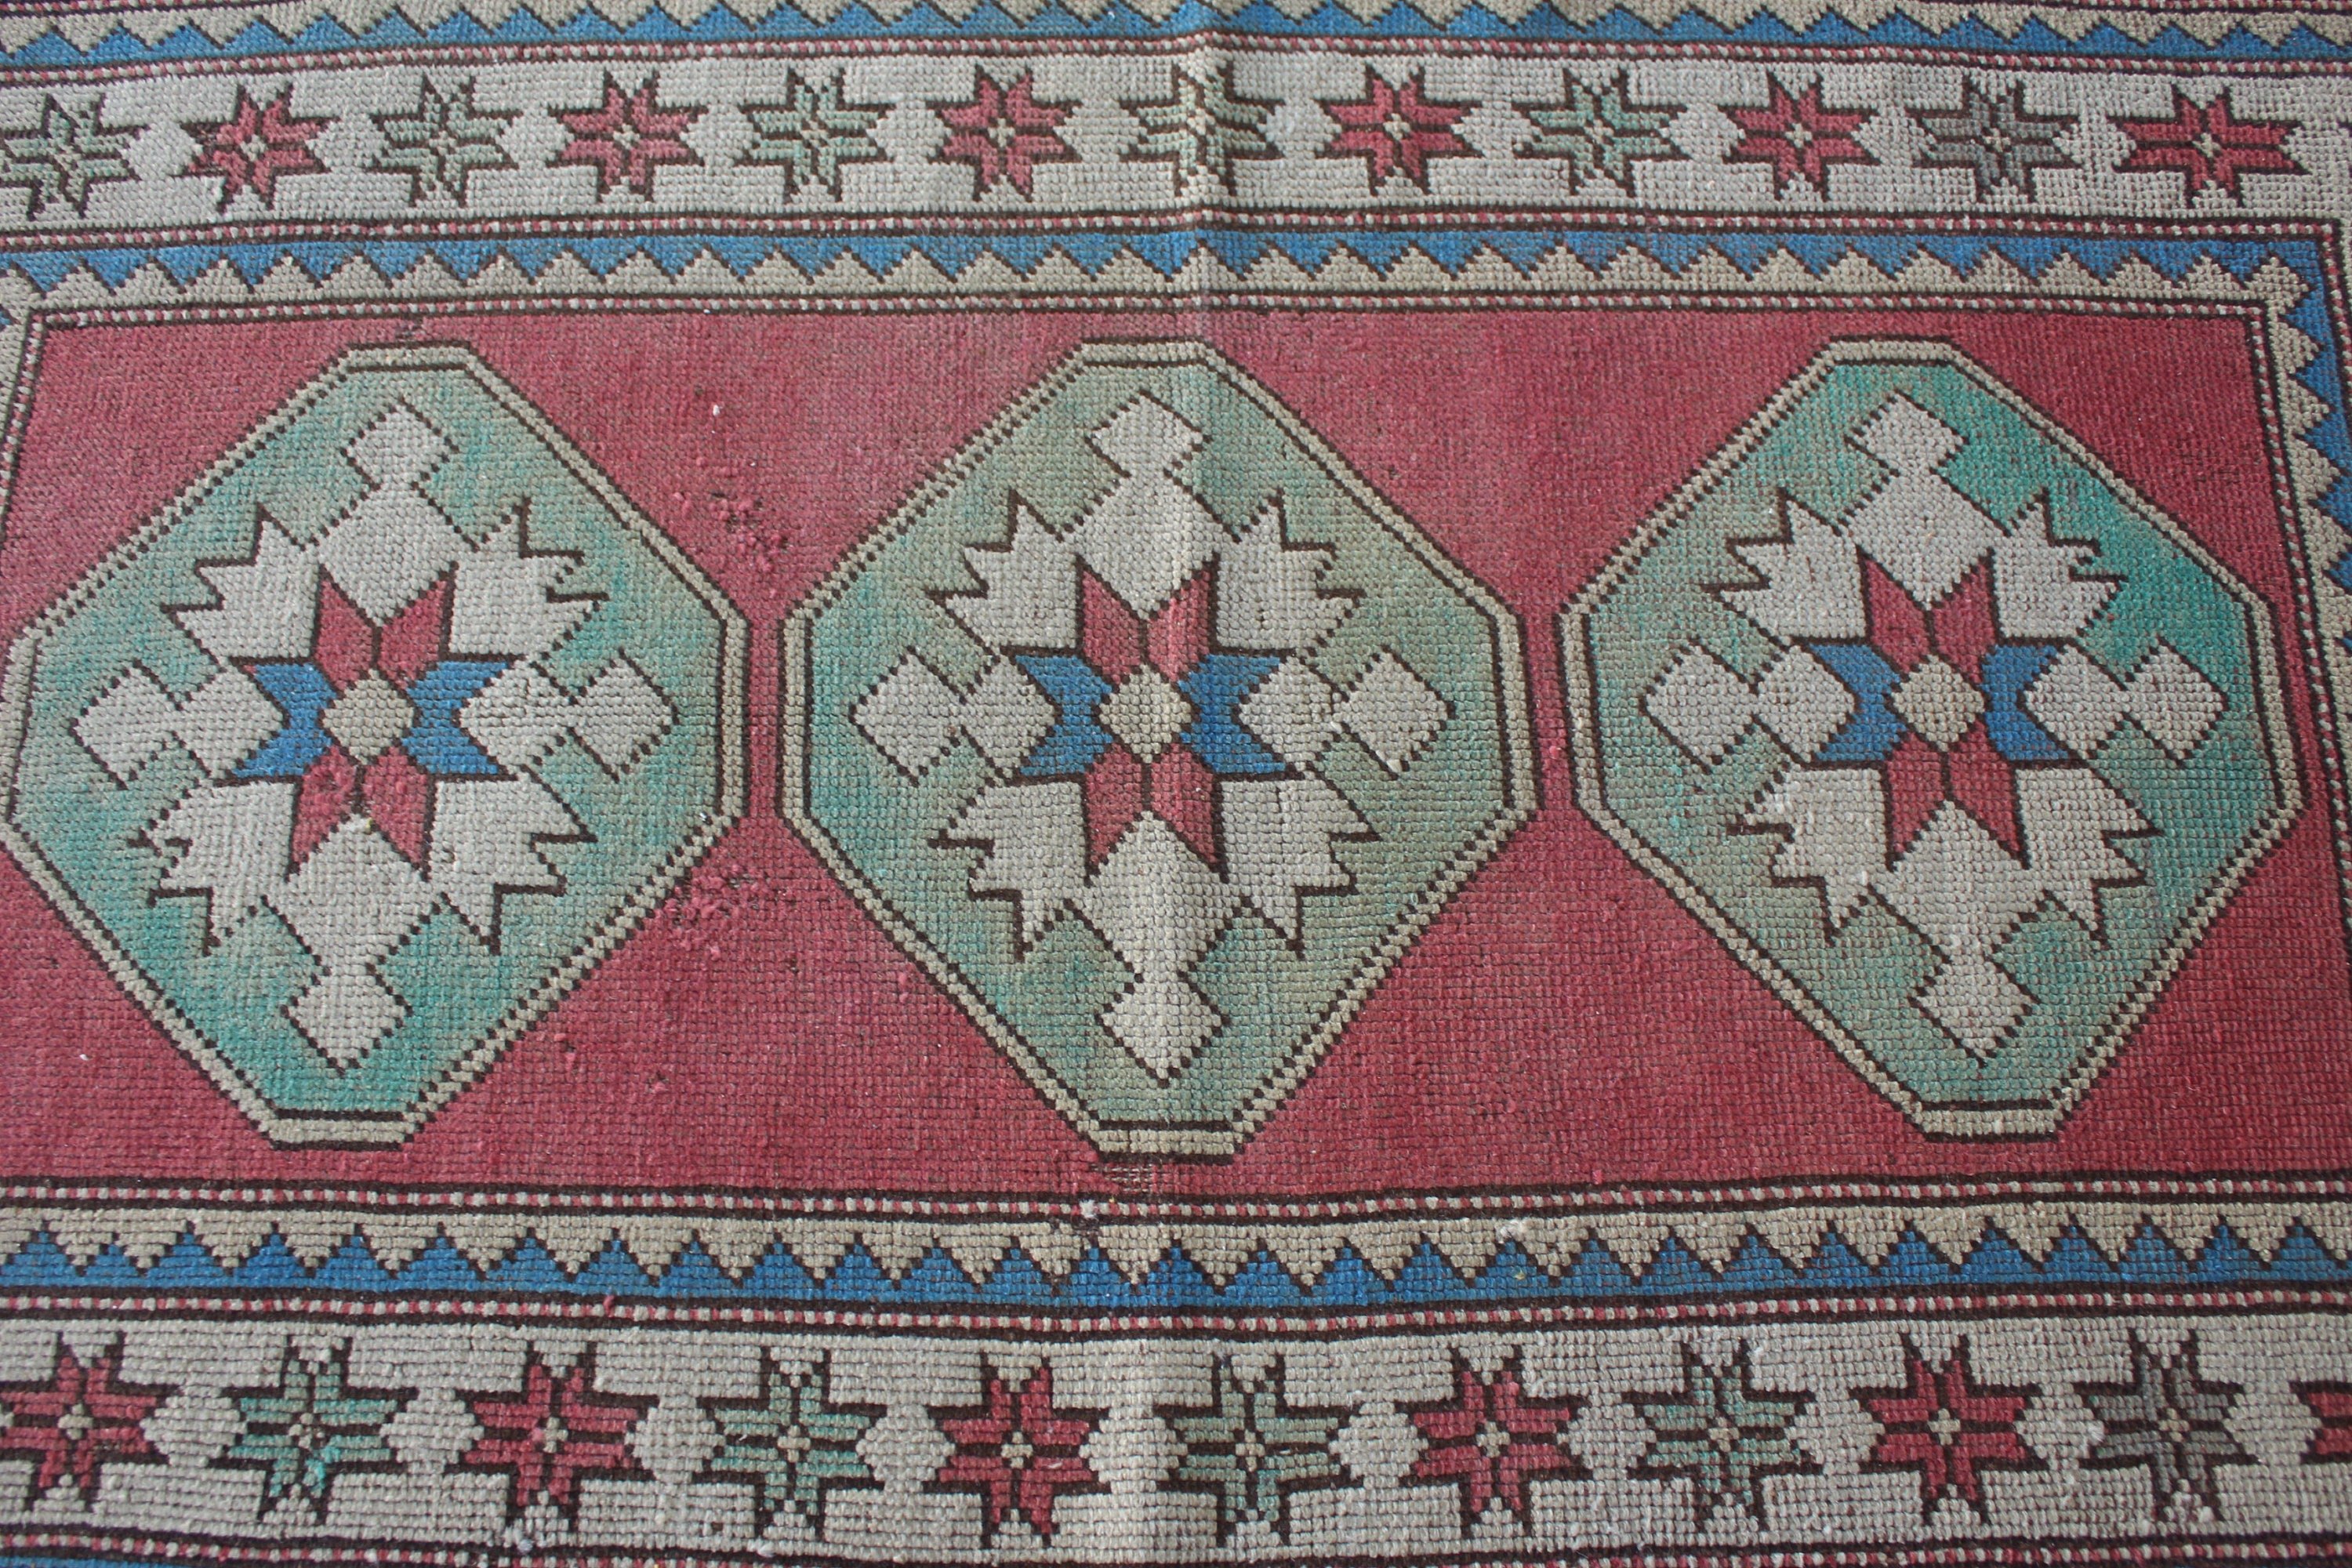 Pink Anatolian Rug, Rugs for Nursery, Entry Rug, Turkish Rugs, Handwoven Rug, 3.1x5.3 ft Accent Rug, Vintage Rugs, Oushak Rug, Kitchen Rug